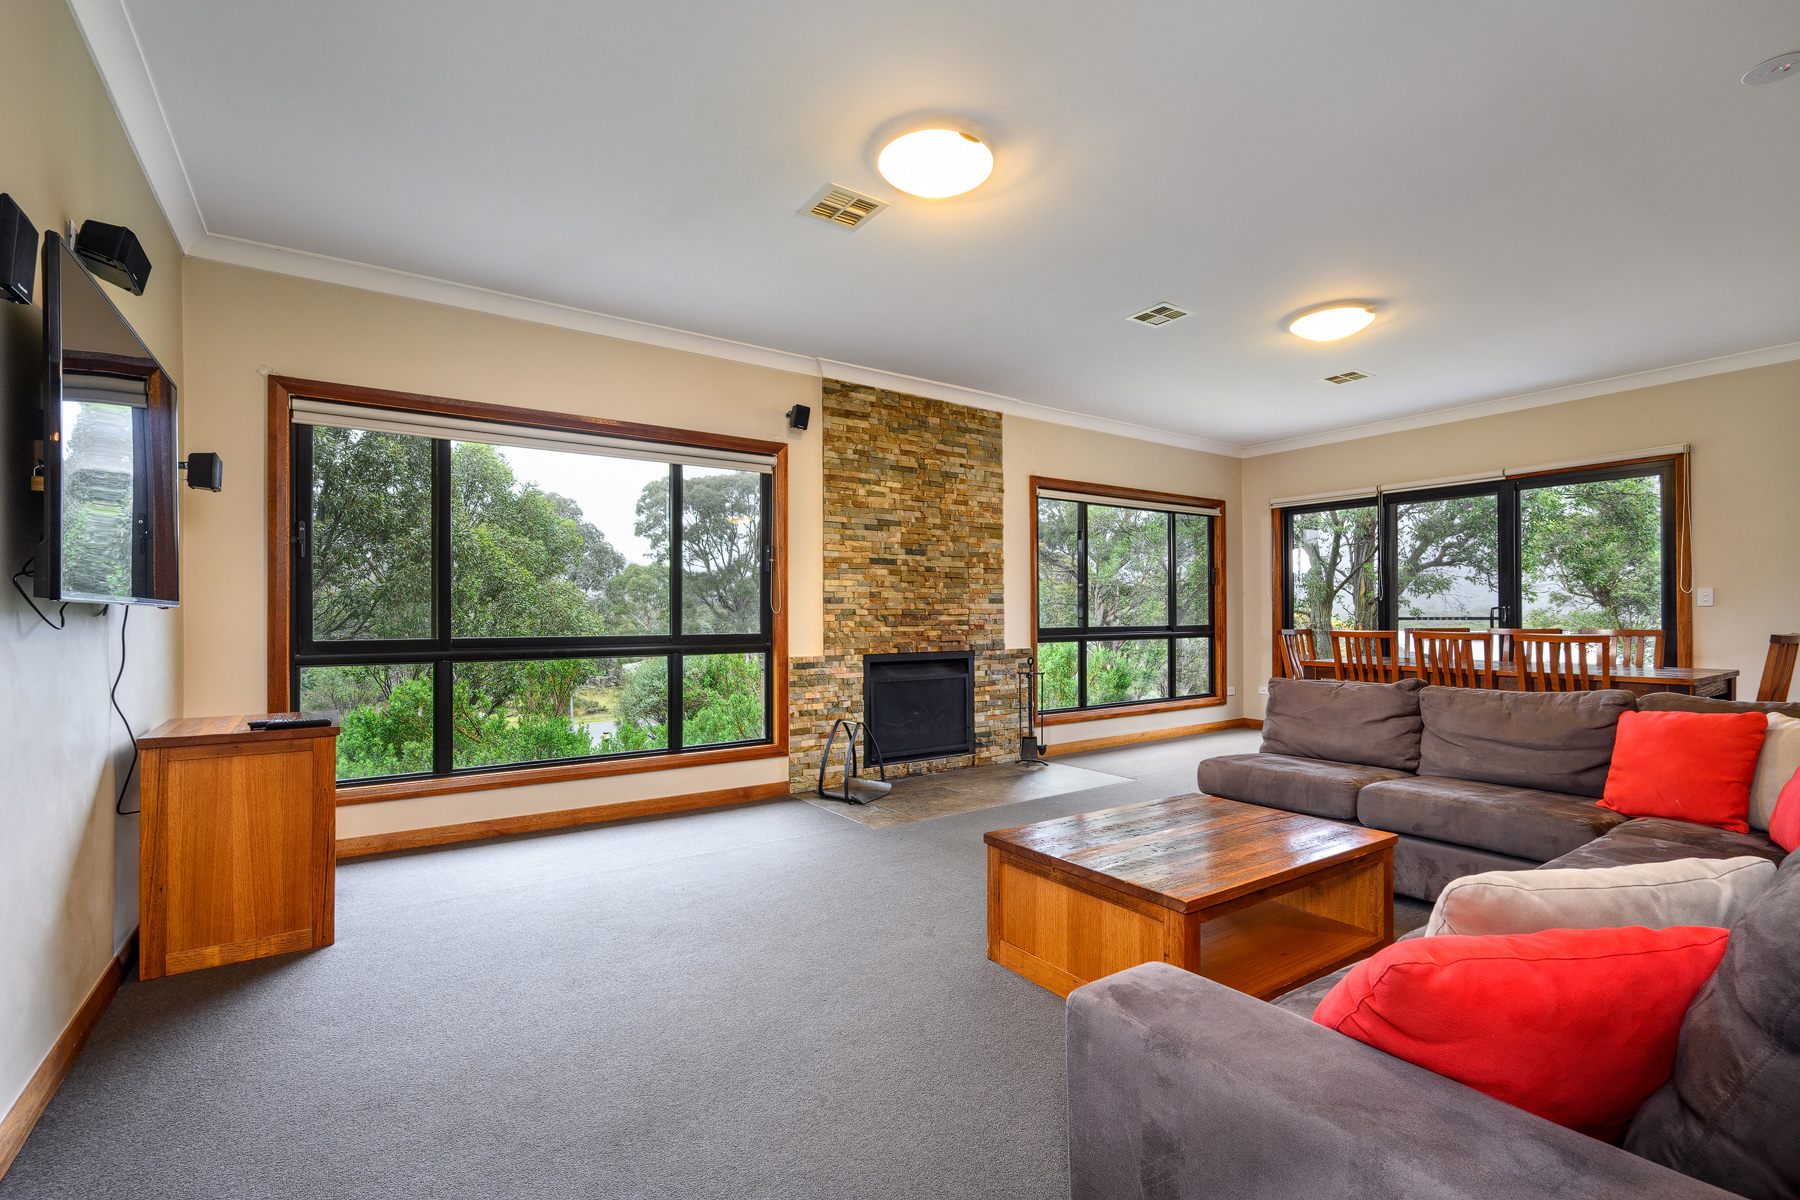 Huge Lake Crackenback Chalet Plus Studio – Two for One – Price: Offers Invited Over $1.5m